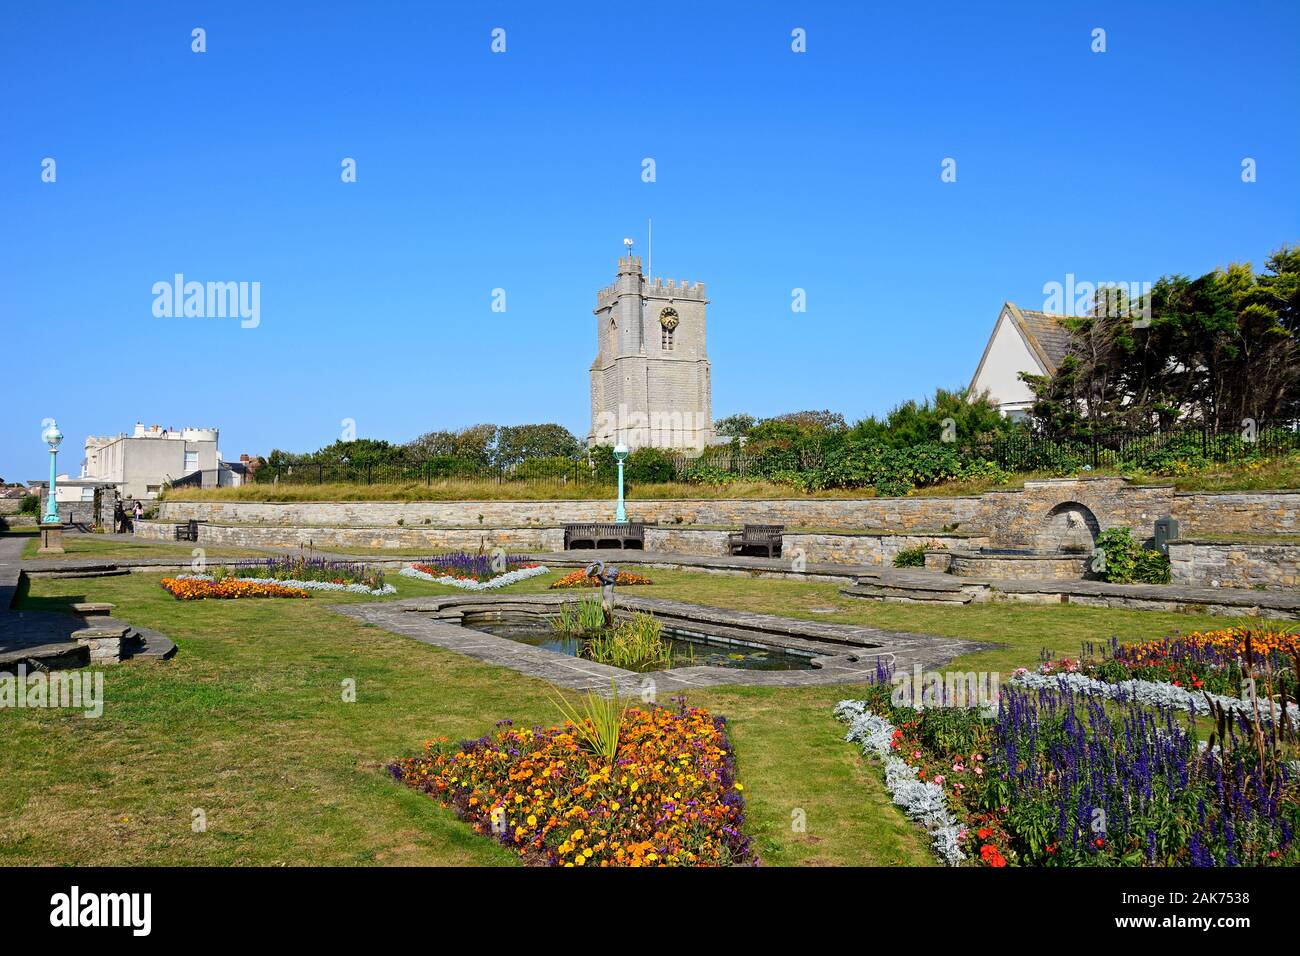 Fountain in the Marine Cove Gardens with St Andrews church to the rear, Burnham-on-Sea, England, UK. Stock Photo